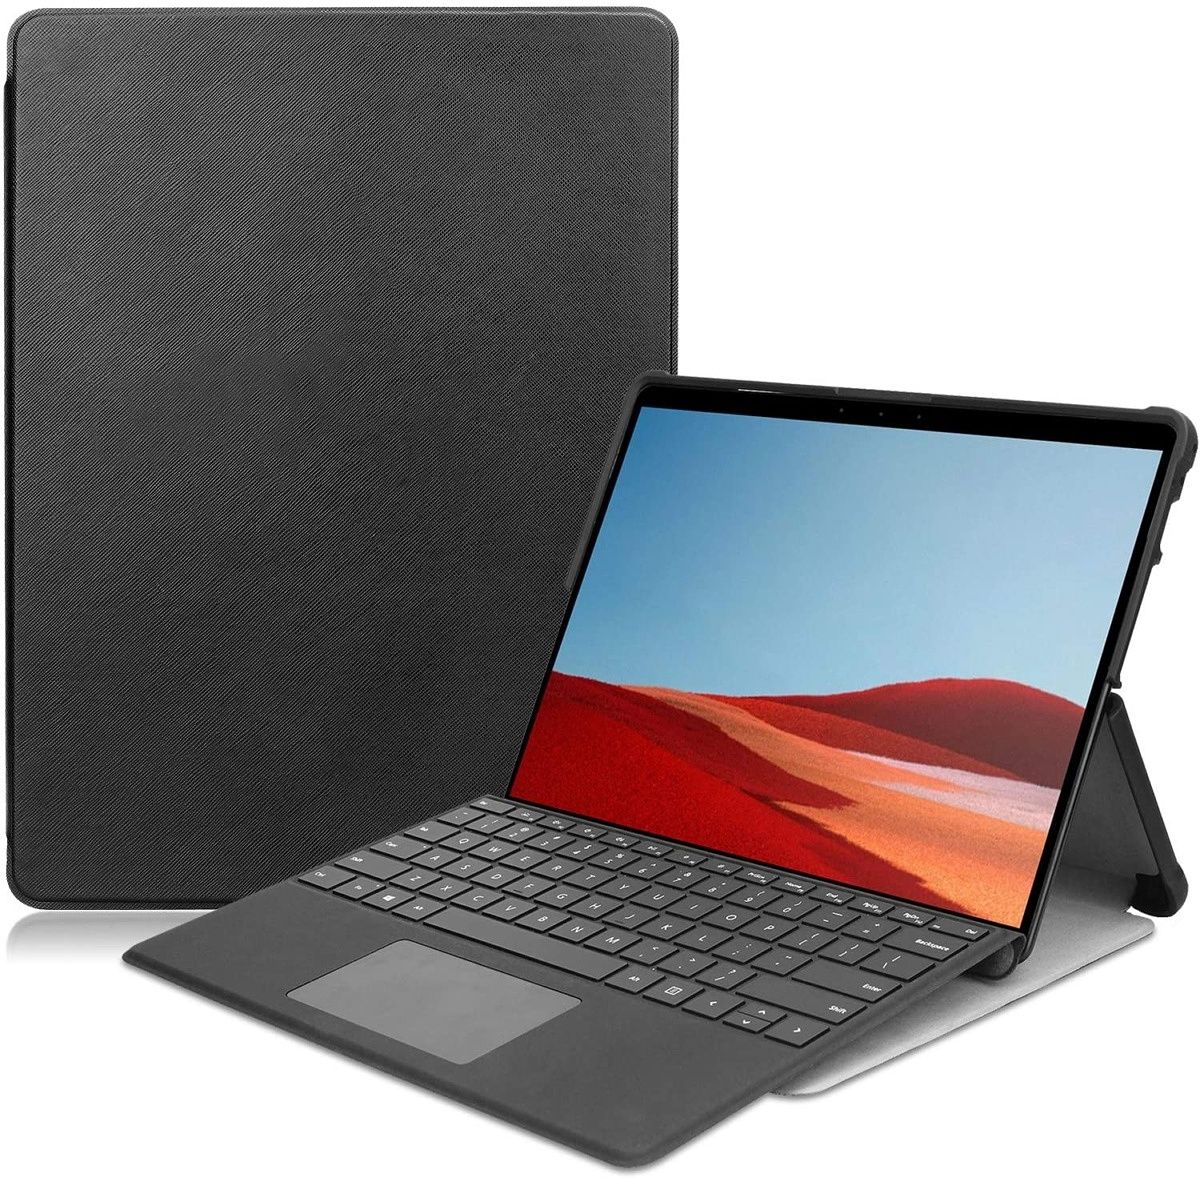 This folio-style case comes with a nice PU leather finish on the outside and a soft microfiber touch on the inside to keep your Surface Pro X safe. You can use it with the Type Cover, and it has cutouts for all the ports and cameras so everything works normally.